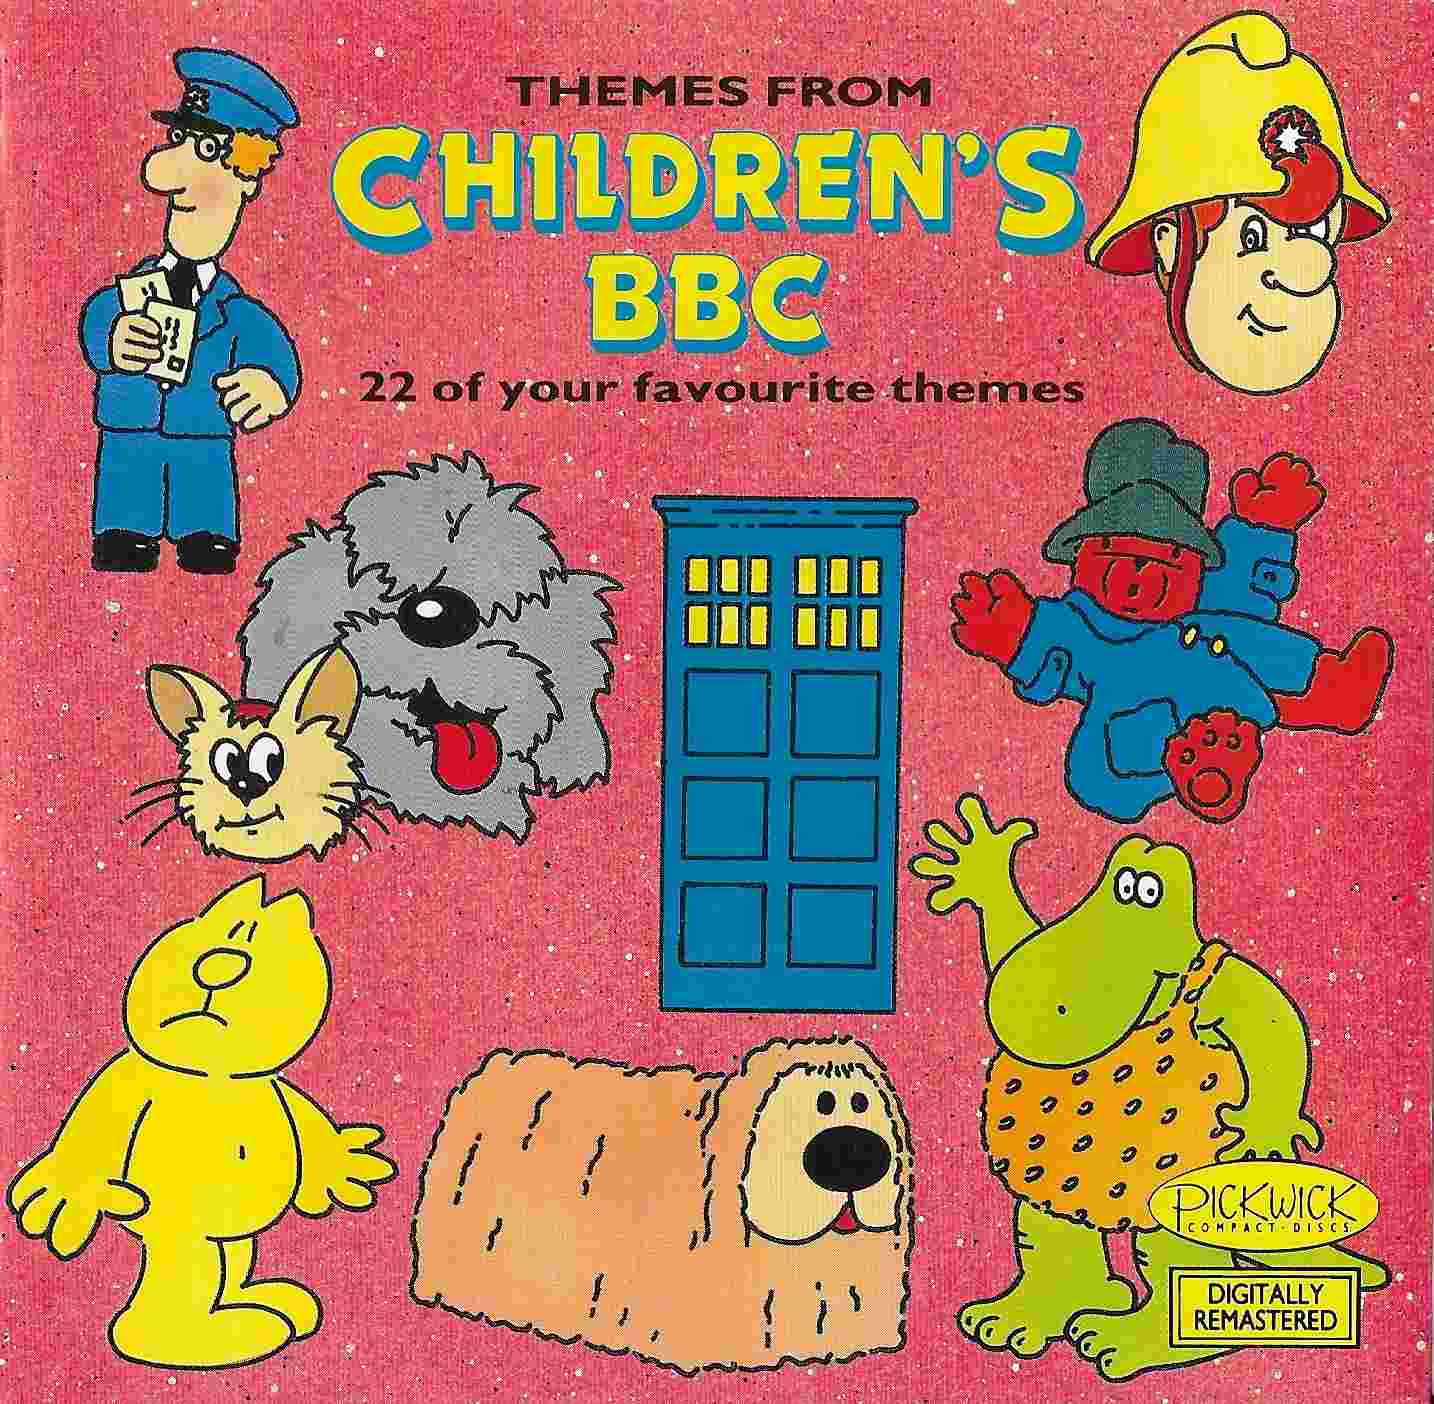 "Themes from Children's BBC" CD cover.